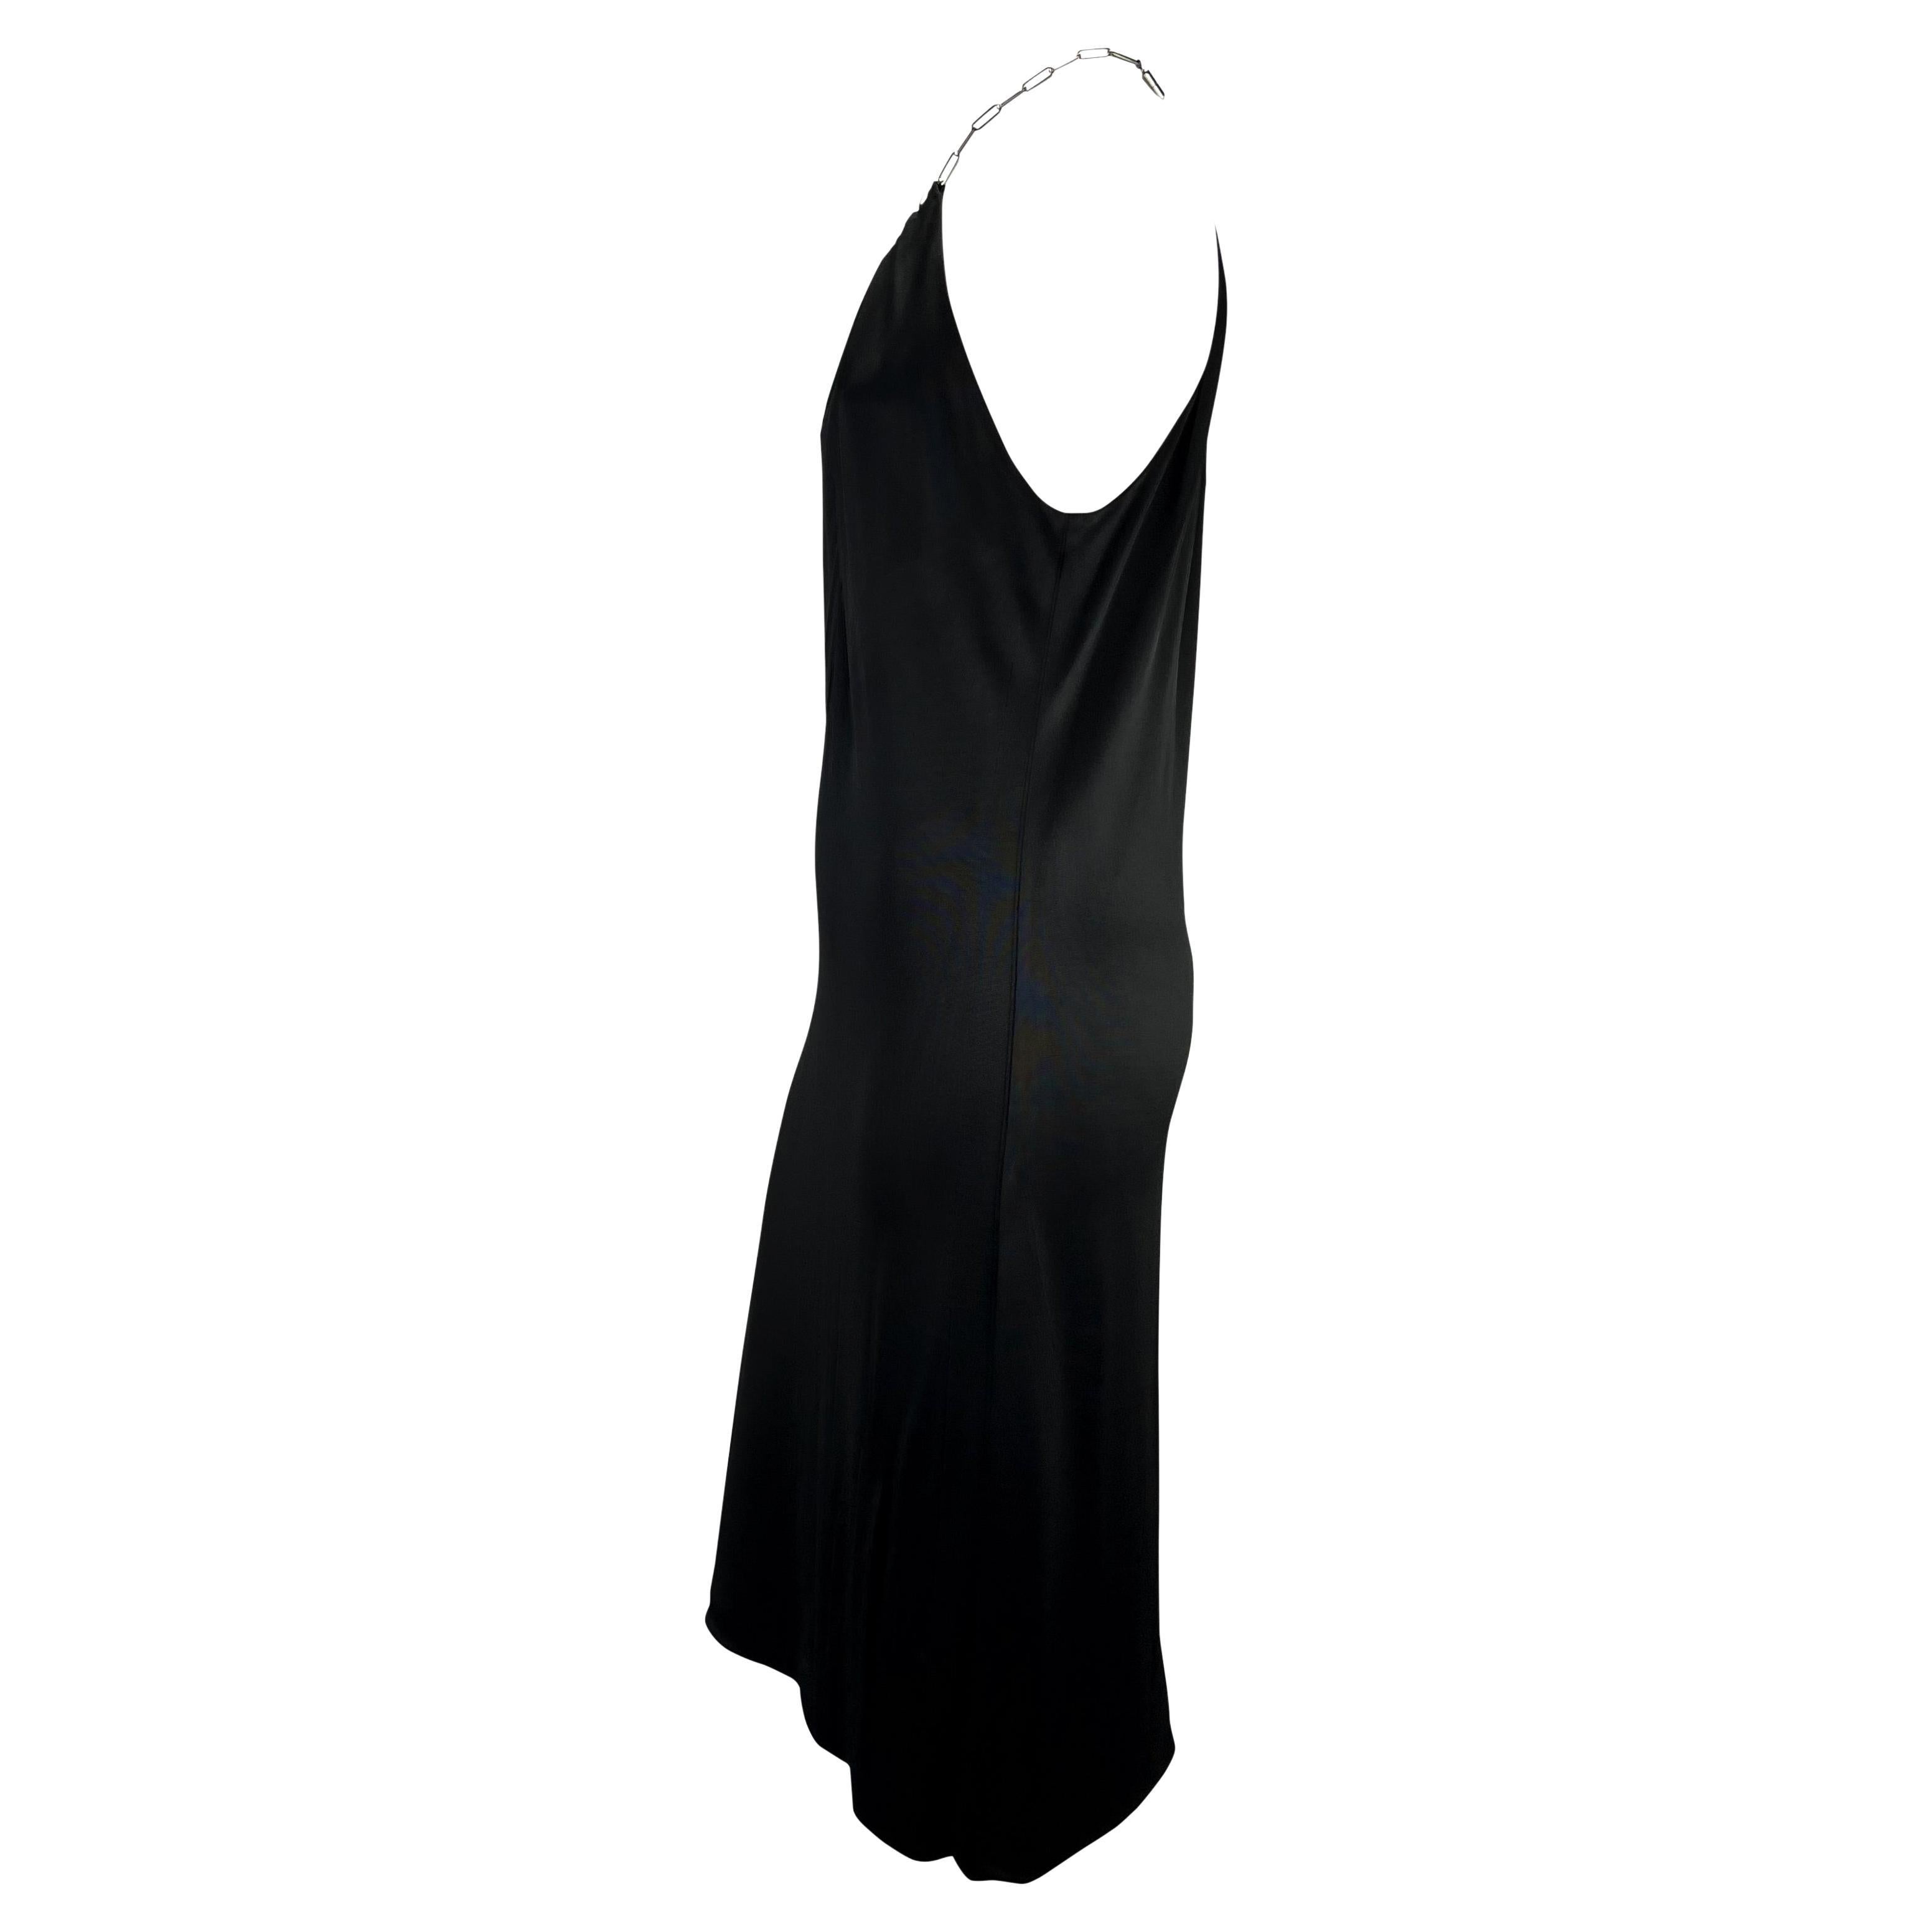 S/S 2000 Gucci by Tom Ford Black Viscose Chain Plunge Sleeveless Dress In Good Condition For Sale In West Hollywood, CA